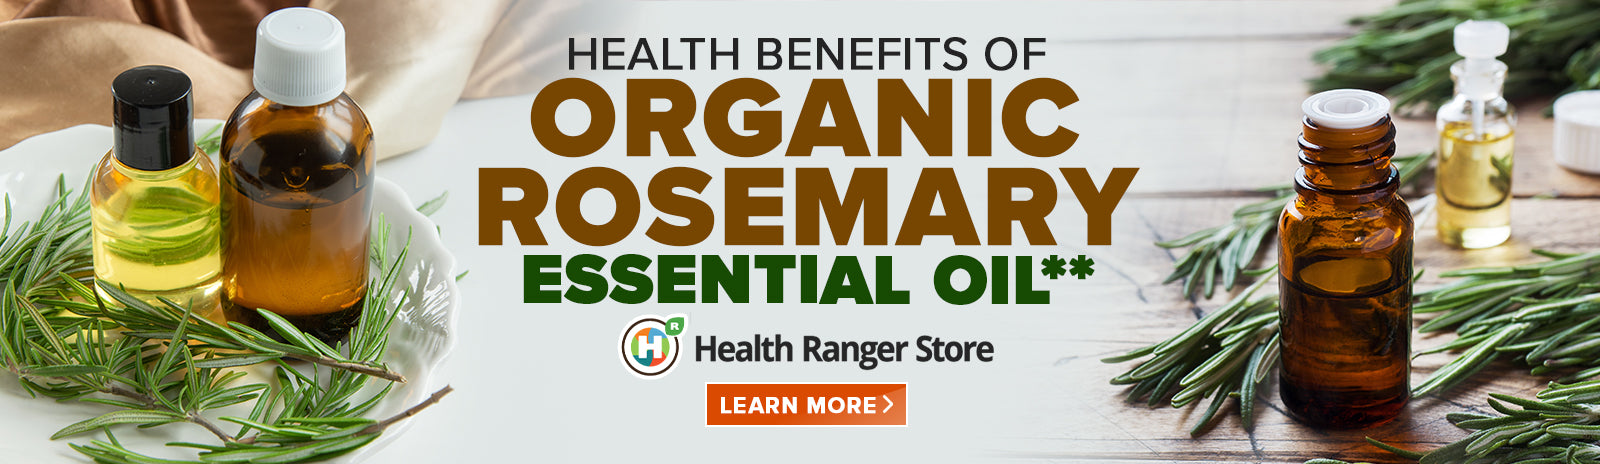 Everything you need to know about Organic Rosemary Essential Oil